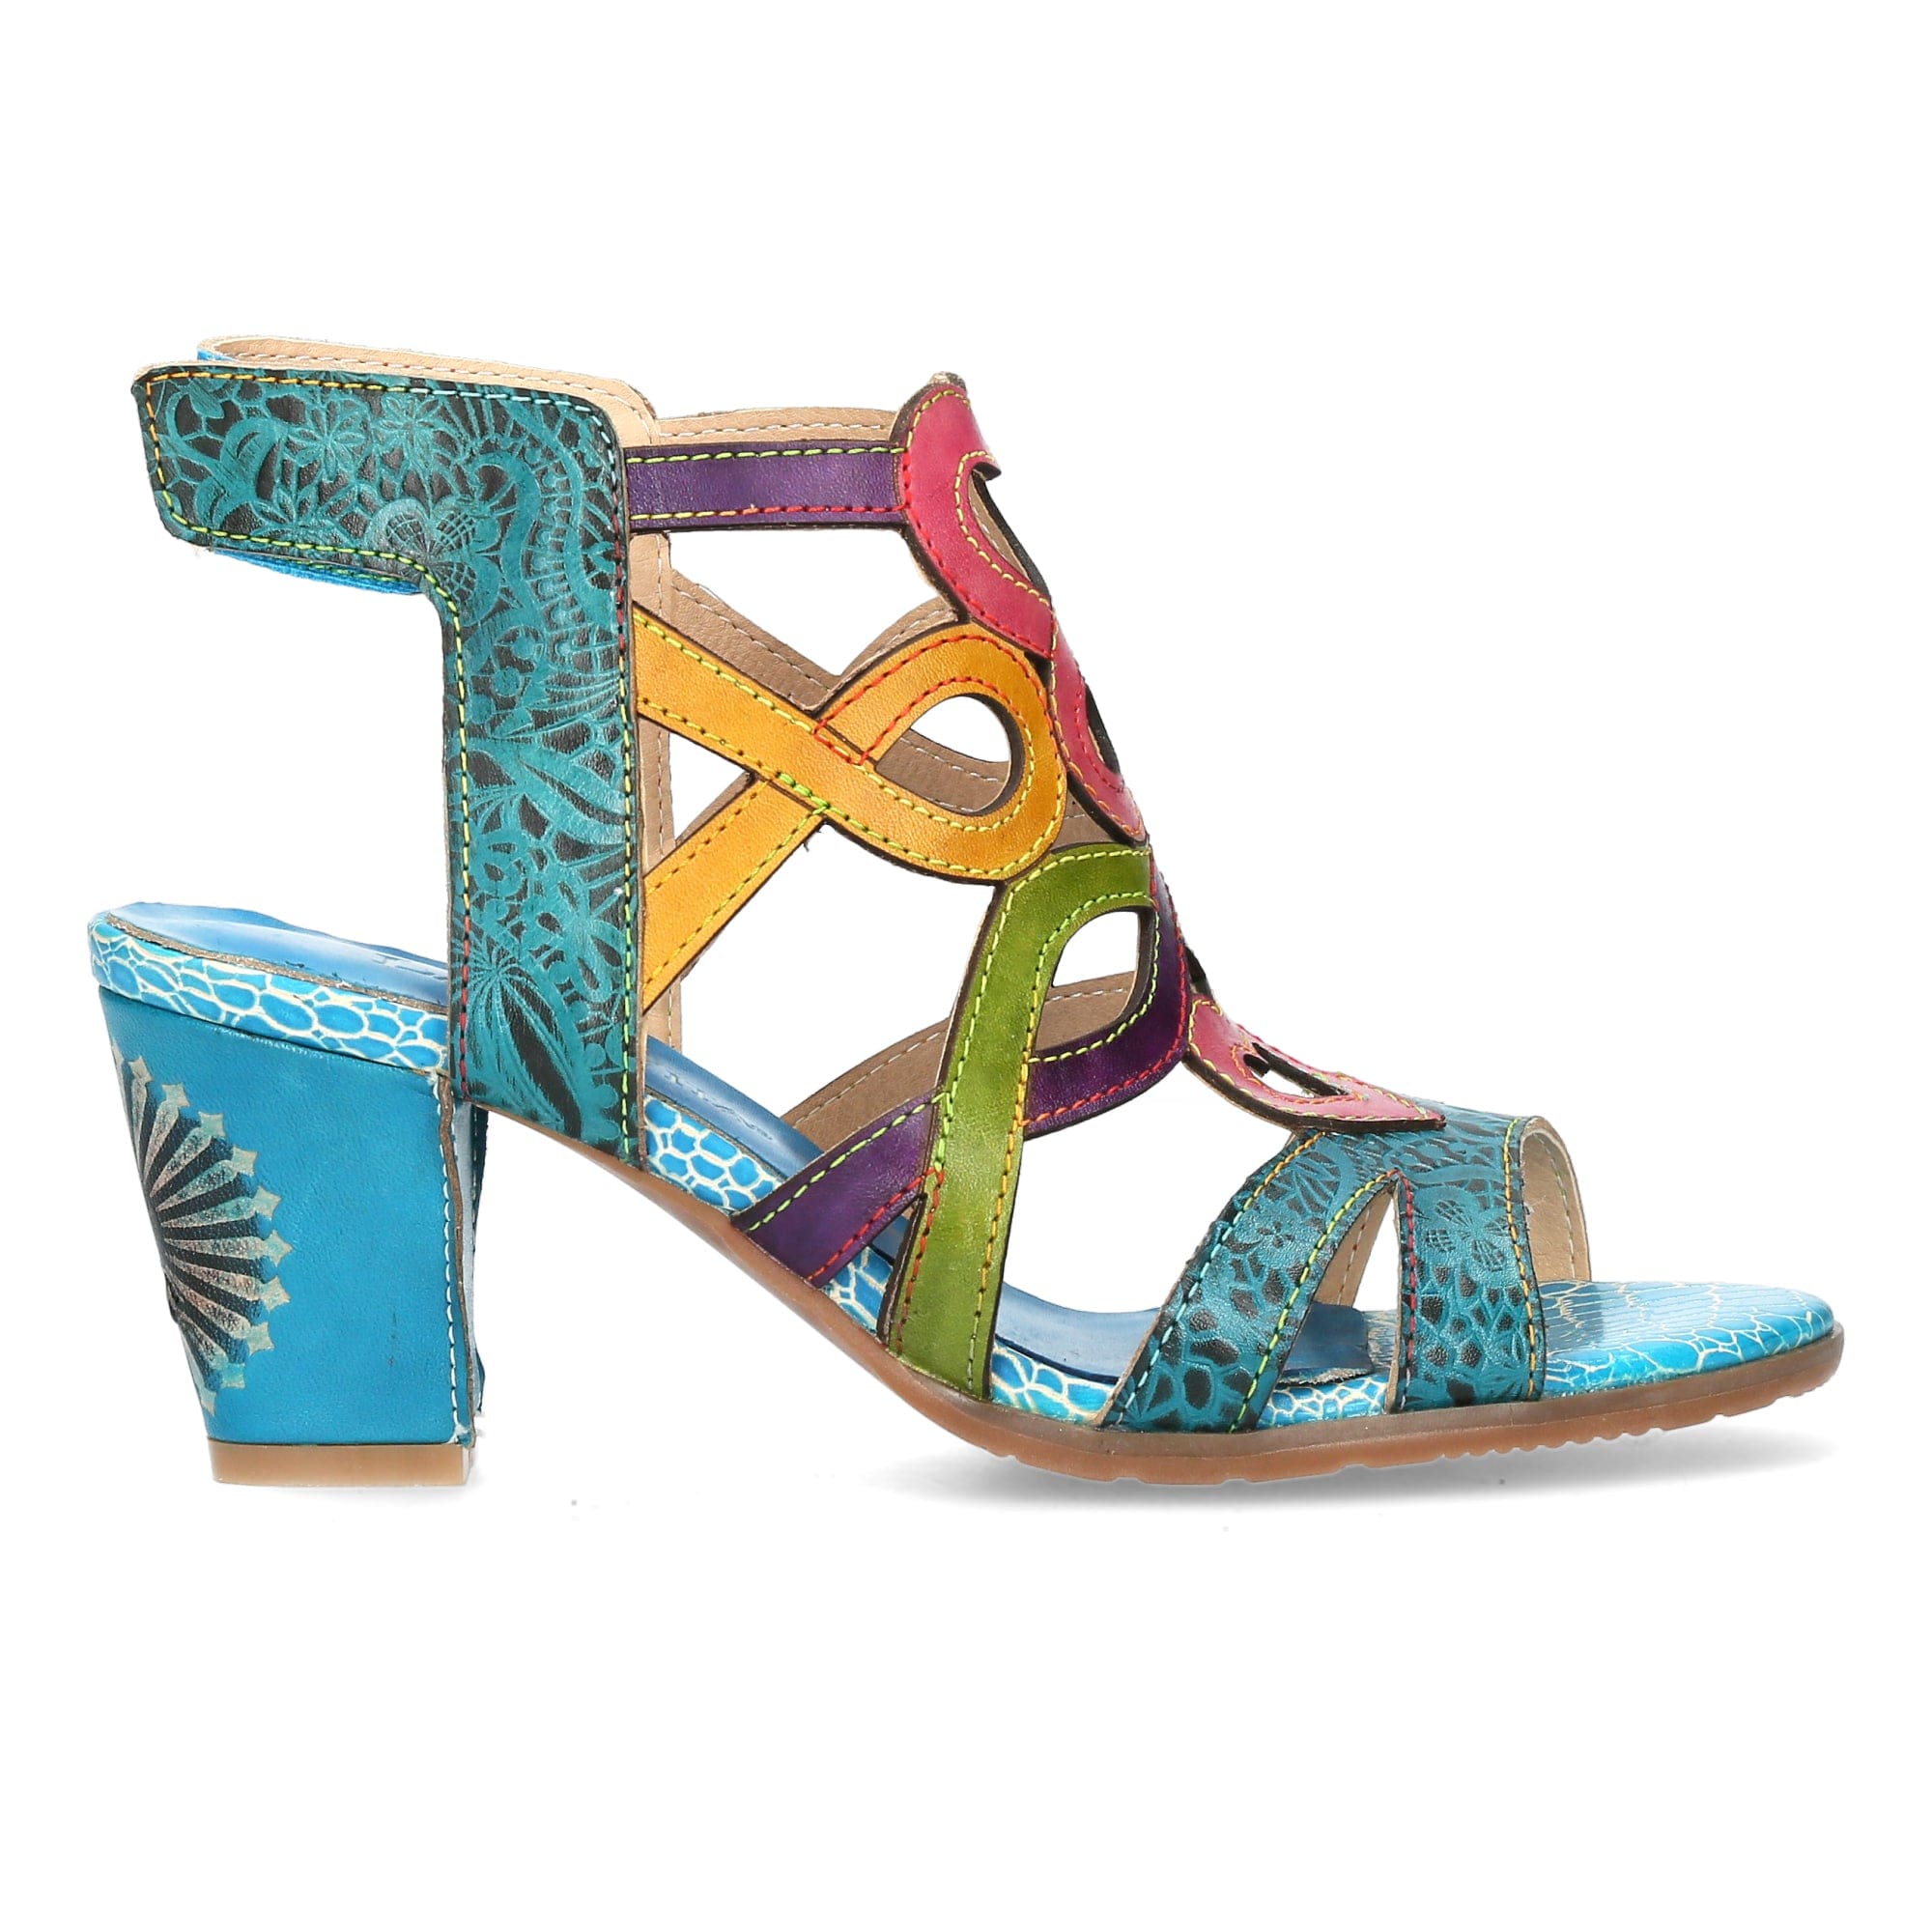 HUCTO 07 shoes - 35 / Turquoise - Sandal